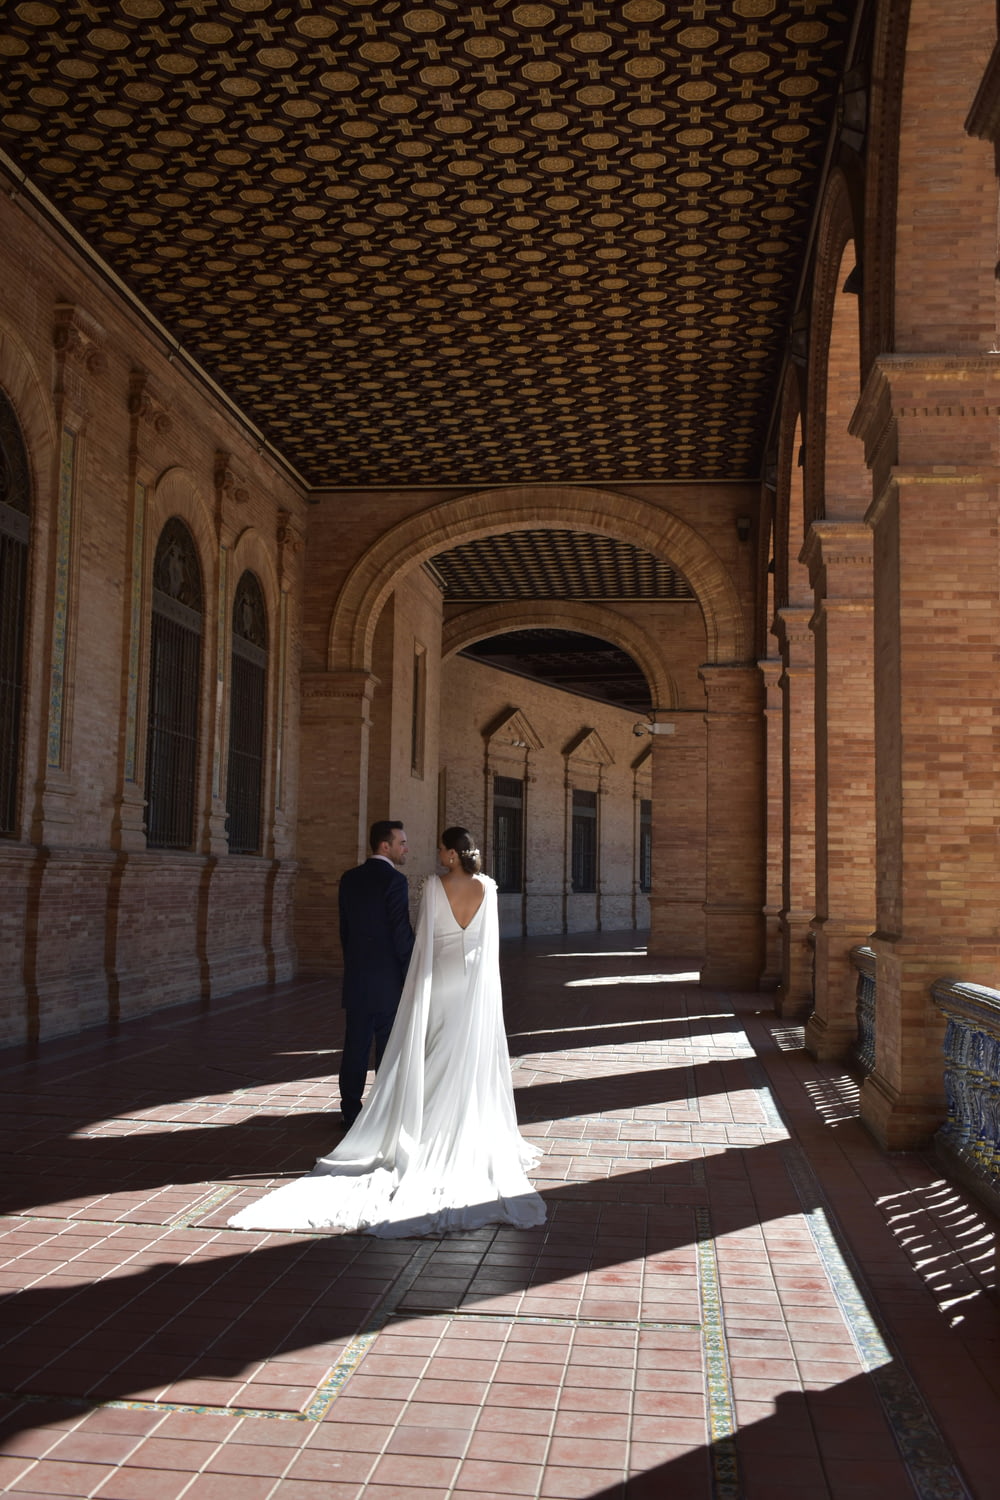 a bride and groom standing in an archway